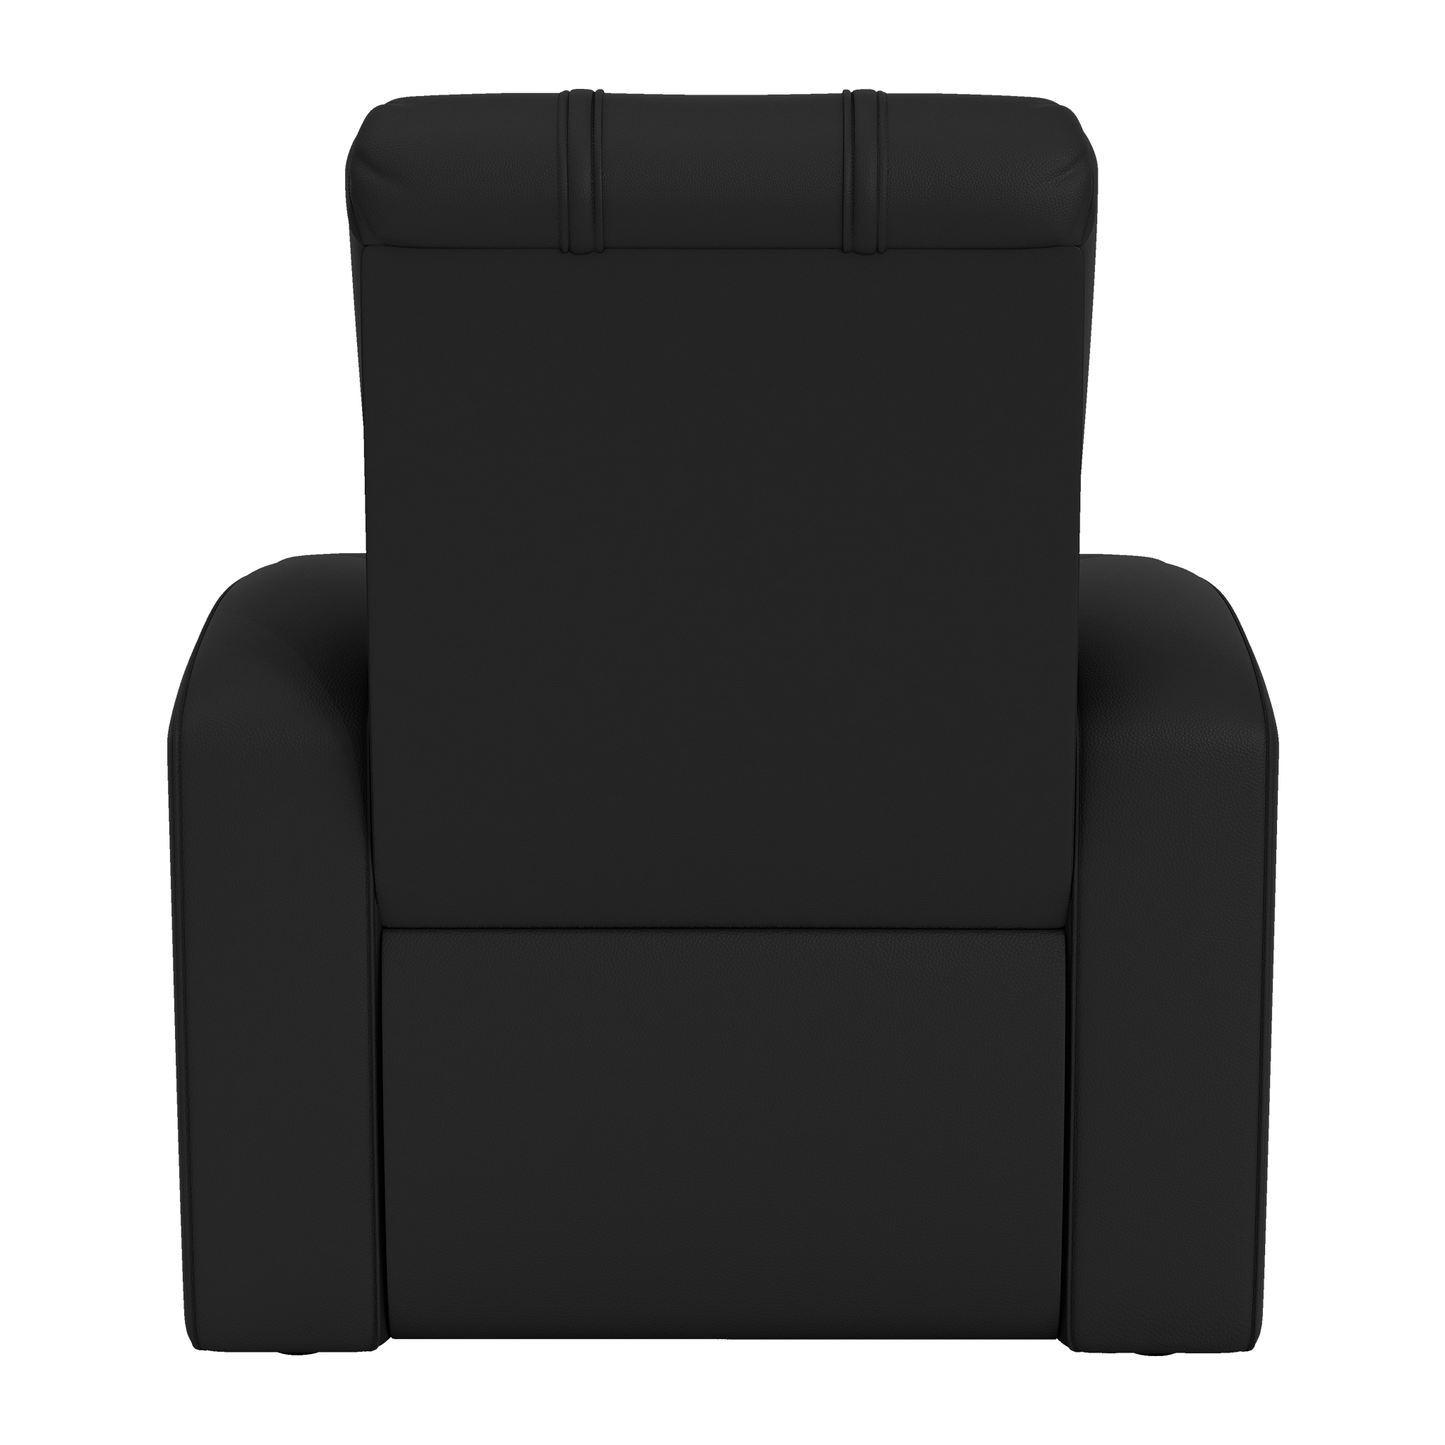 Relax Home Theater Recliner with San Francisco Giants Champs'14